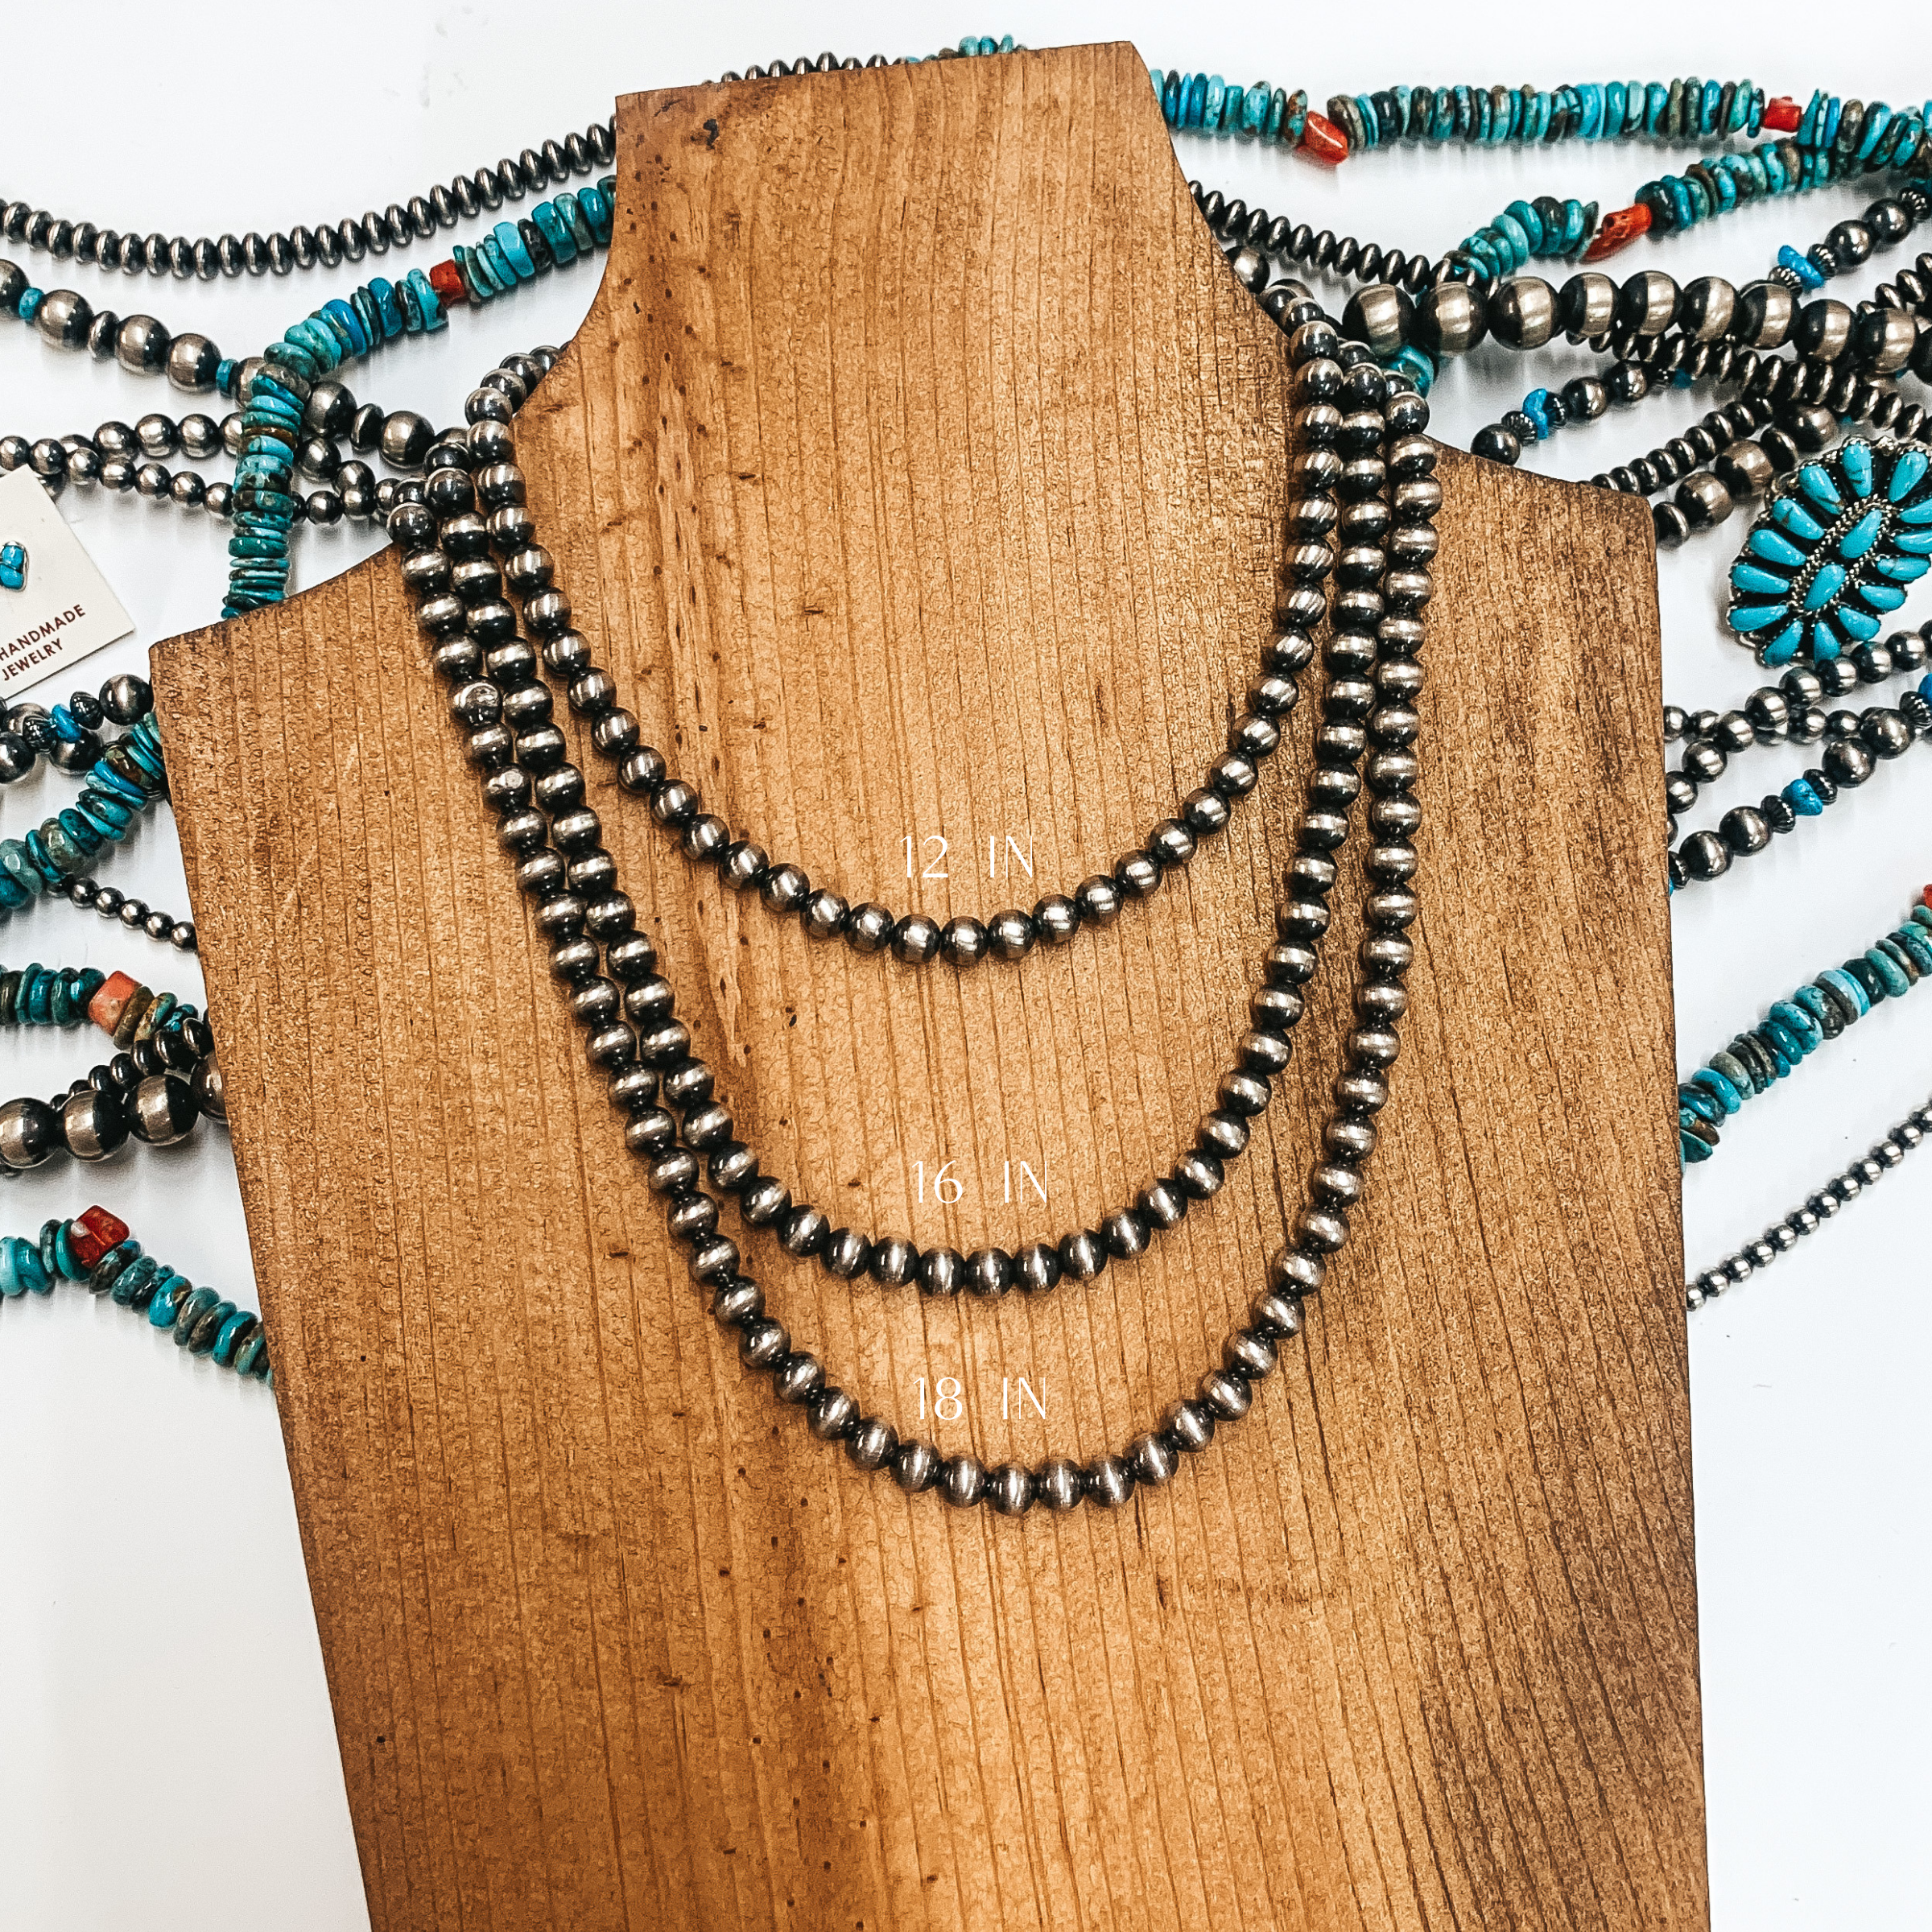 Navajo | Navajo Handmade 6mm Navajo Pearls Necklace | Varying Lengths - Giddy Up Glamour Boutique